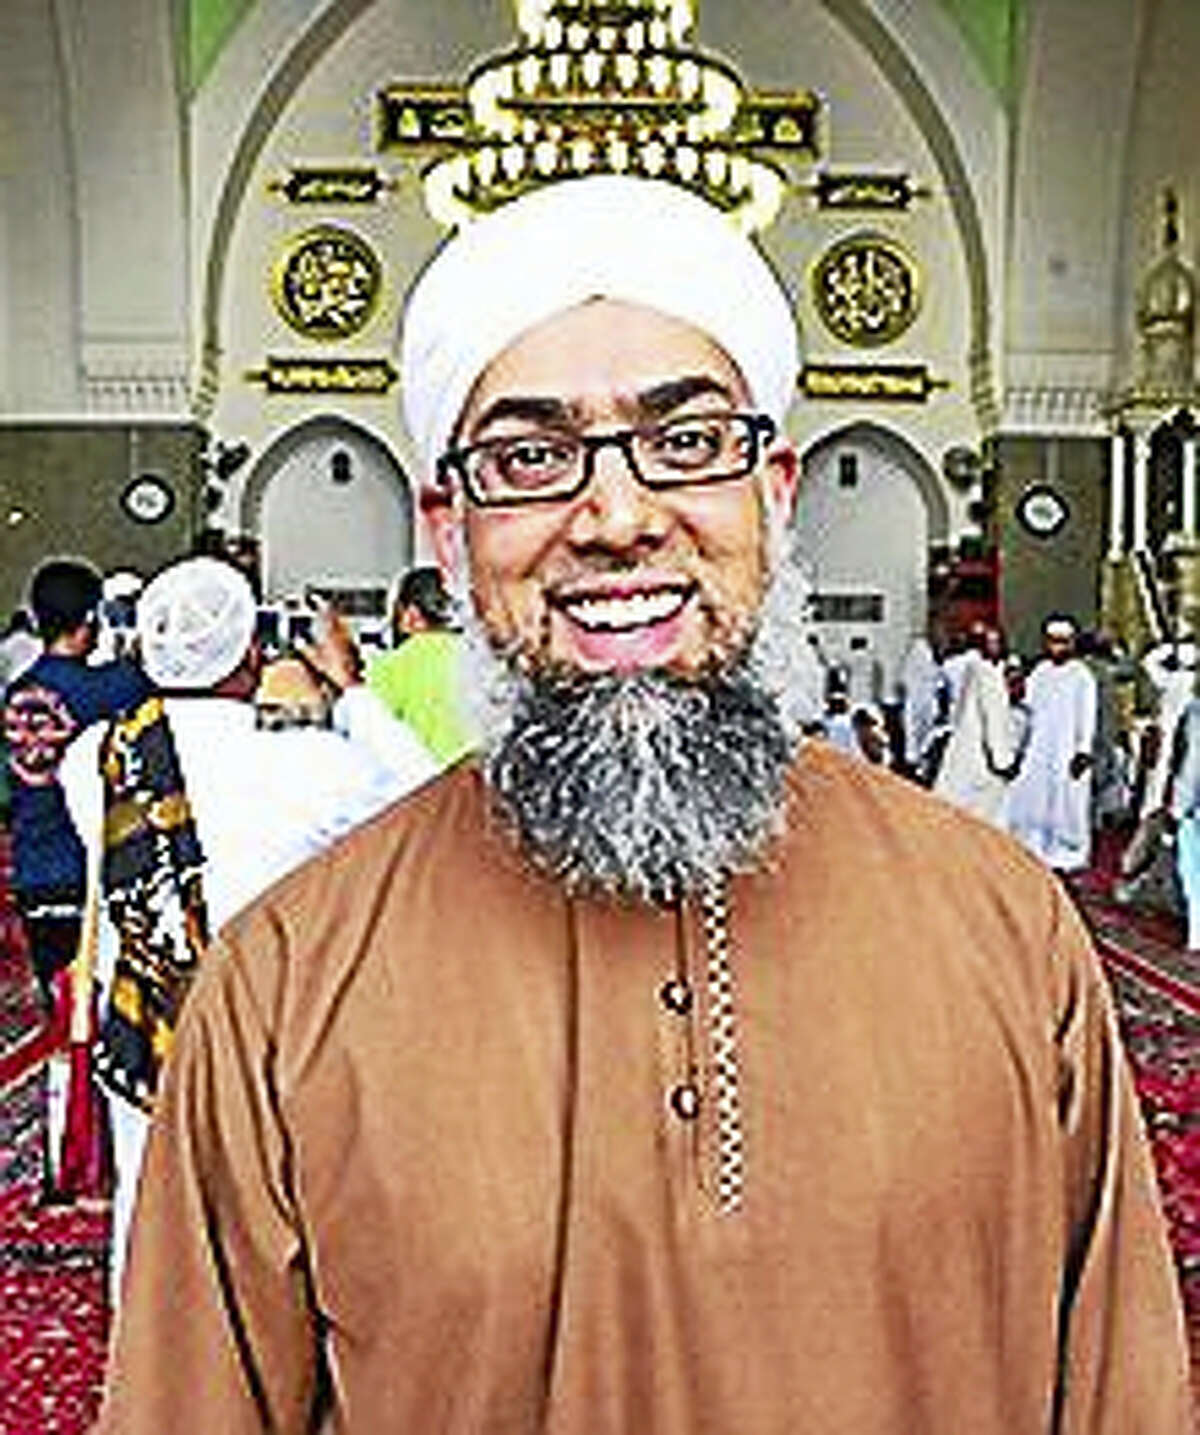 Omer Bajwa, director of Muslim life at Yale University, during an Umrah trip to Mecca in 2016.